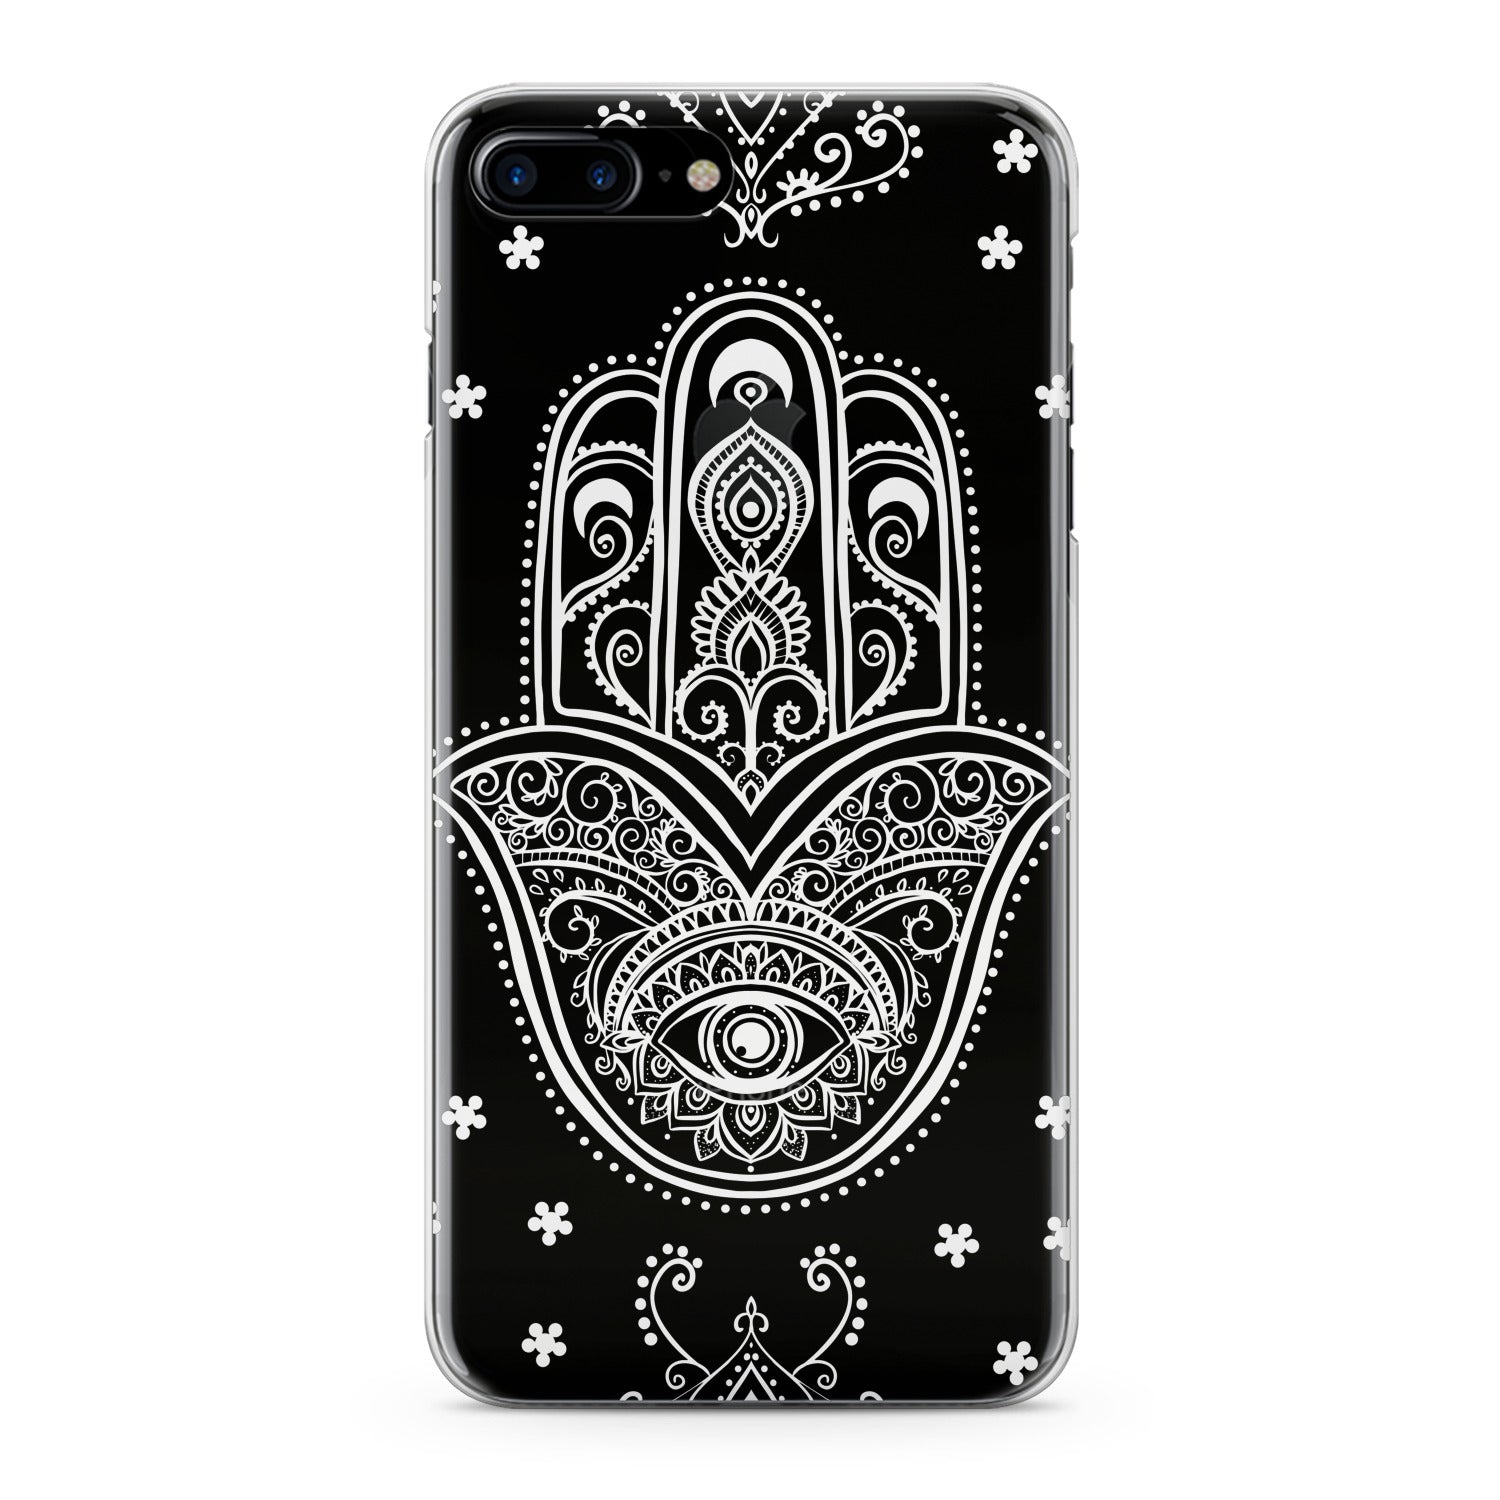 Lex Altern Indian Hamsa Phone Case for your iPhone & Android phone.